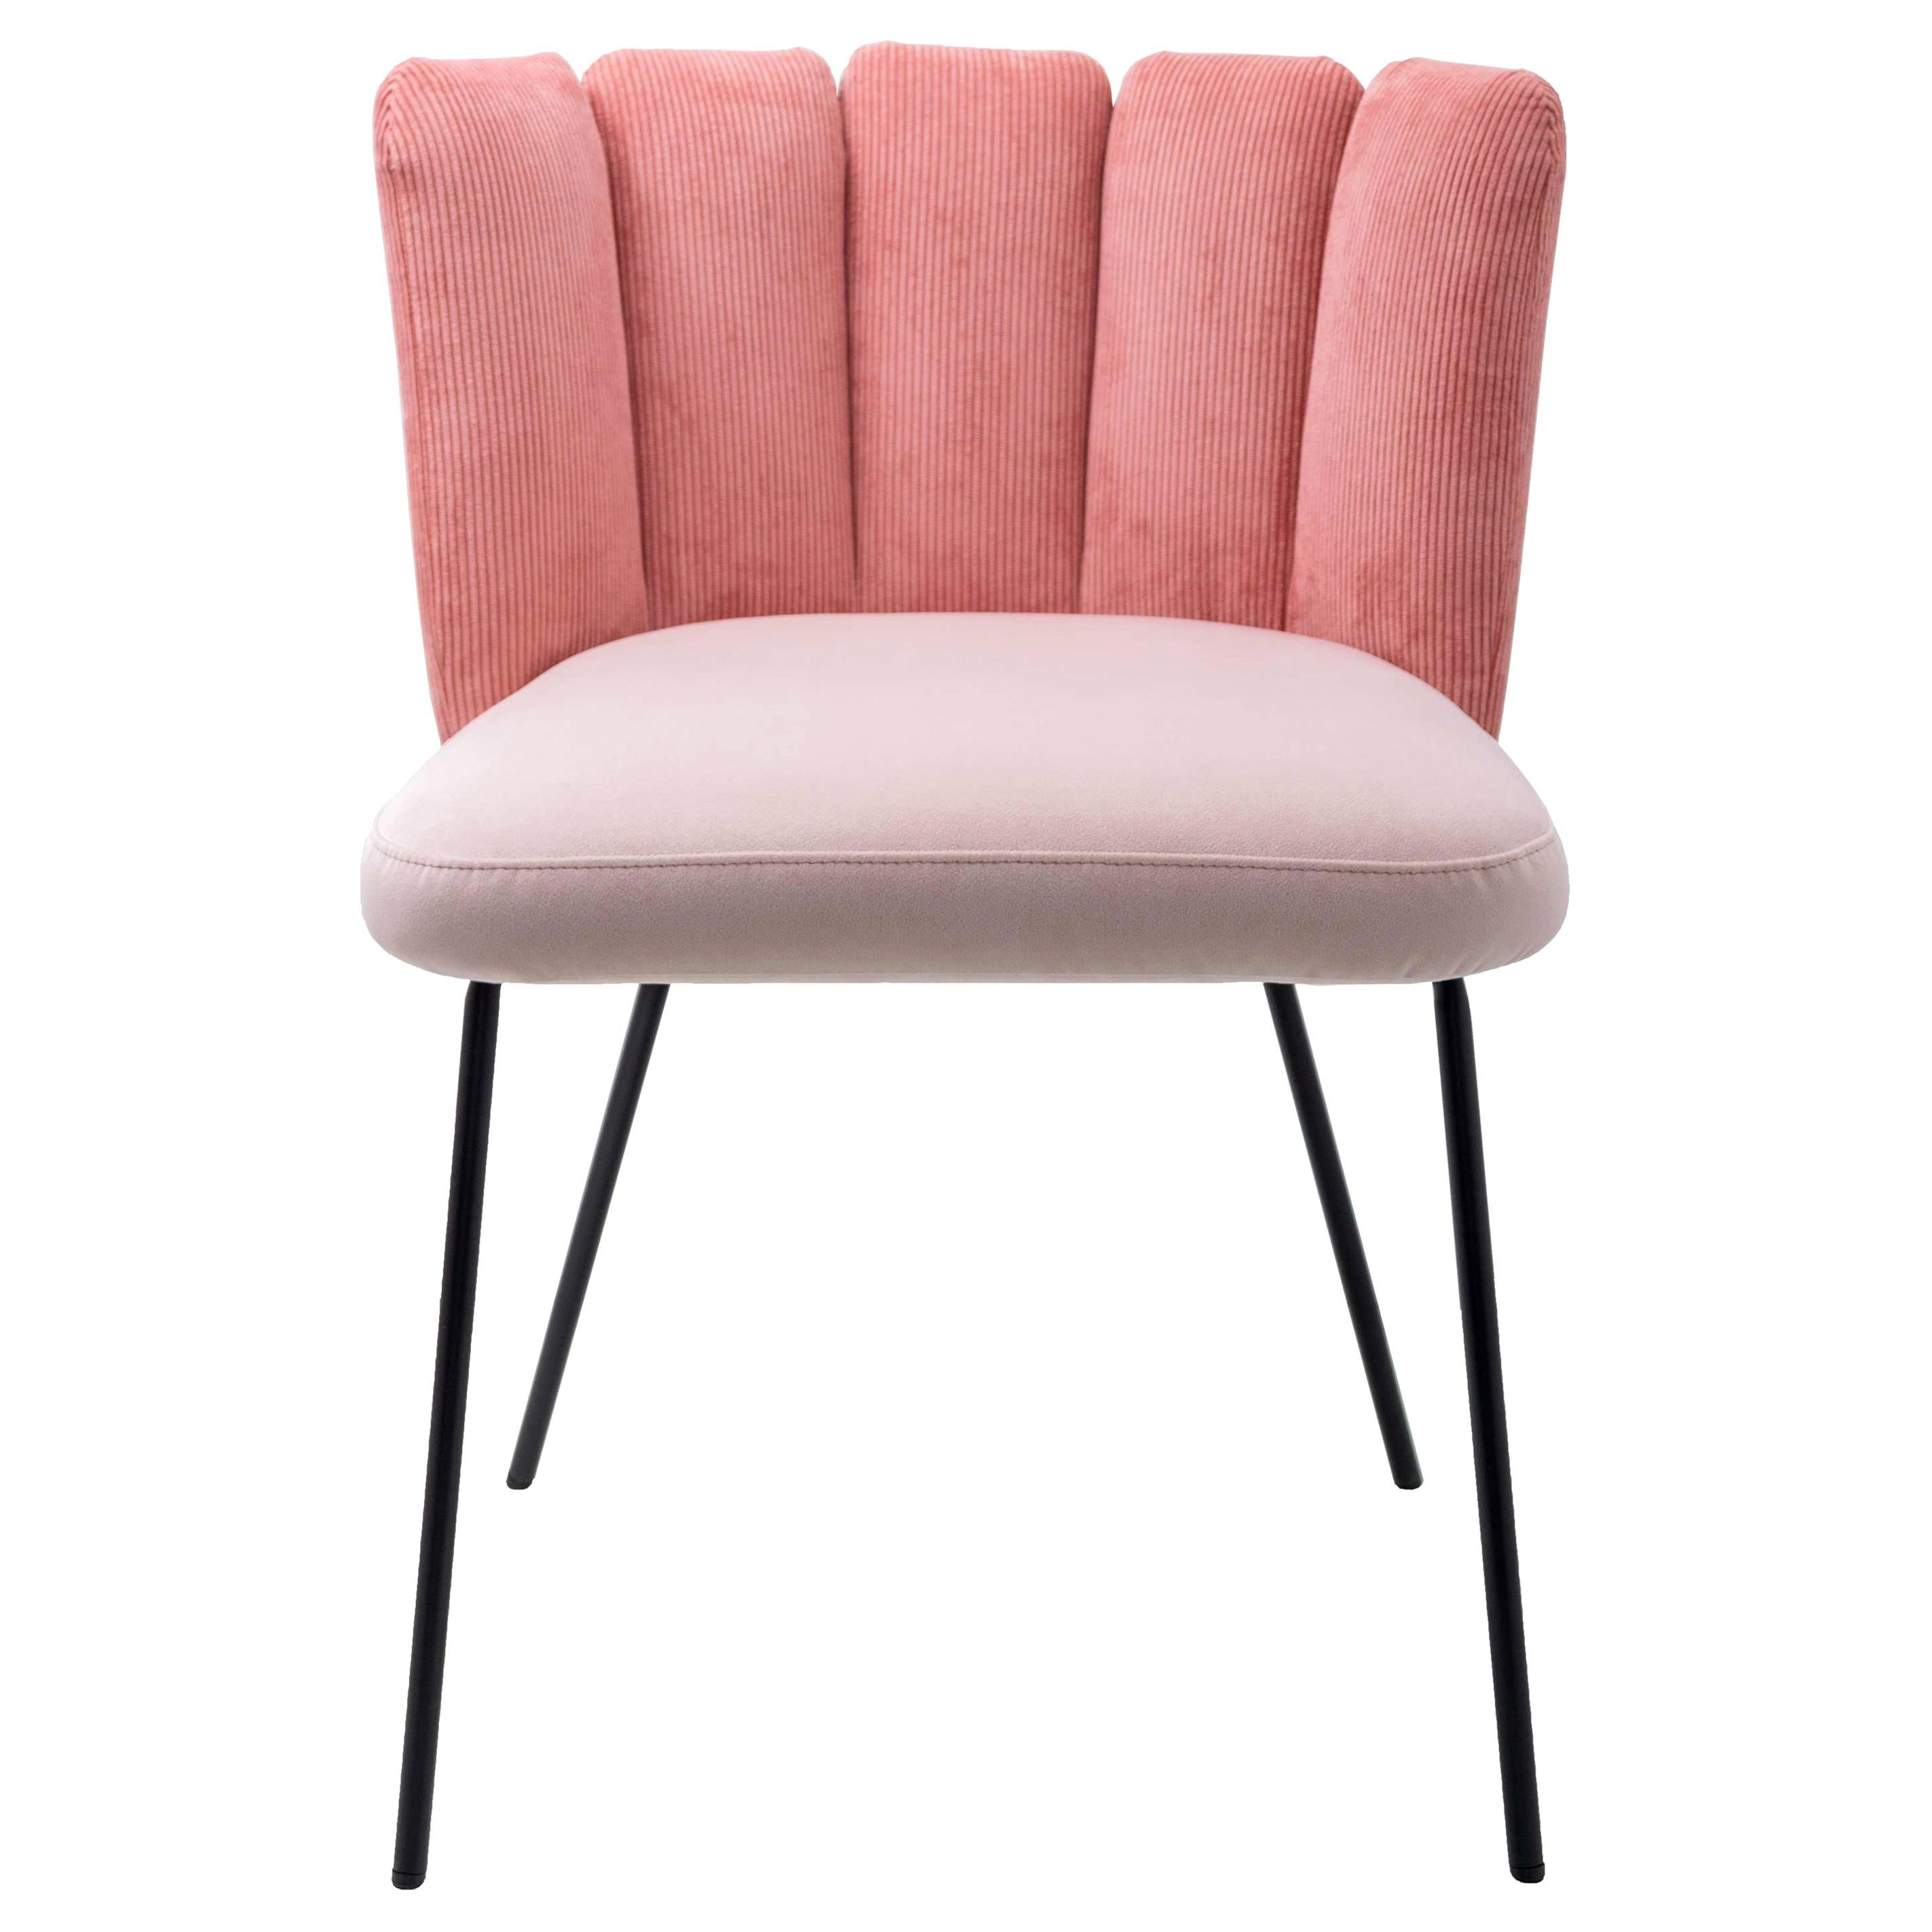 Pink Gaia Dining Chair, Designed by Monica Armani, Made in Italy